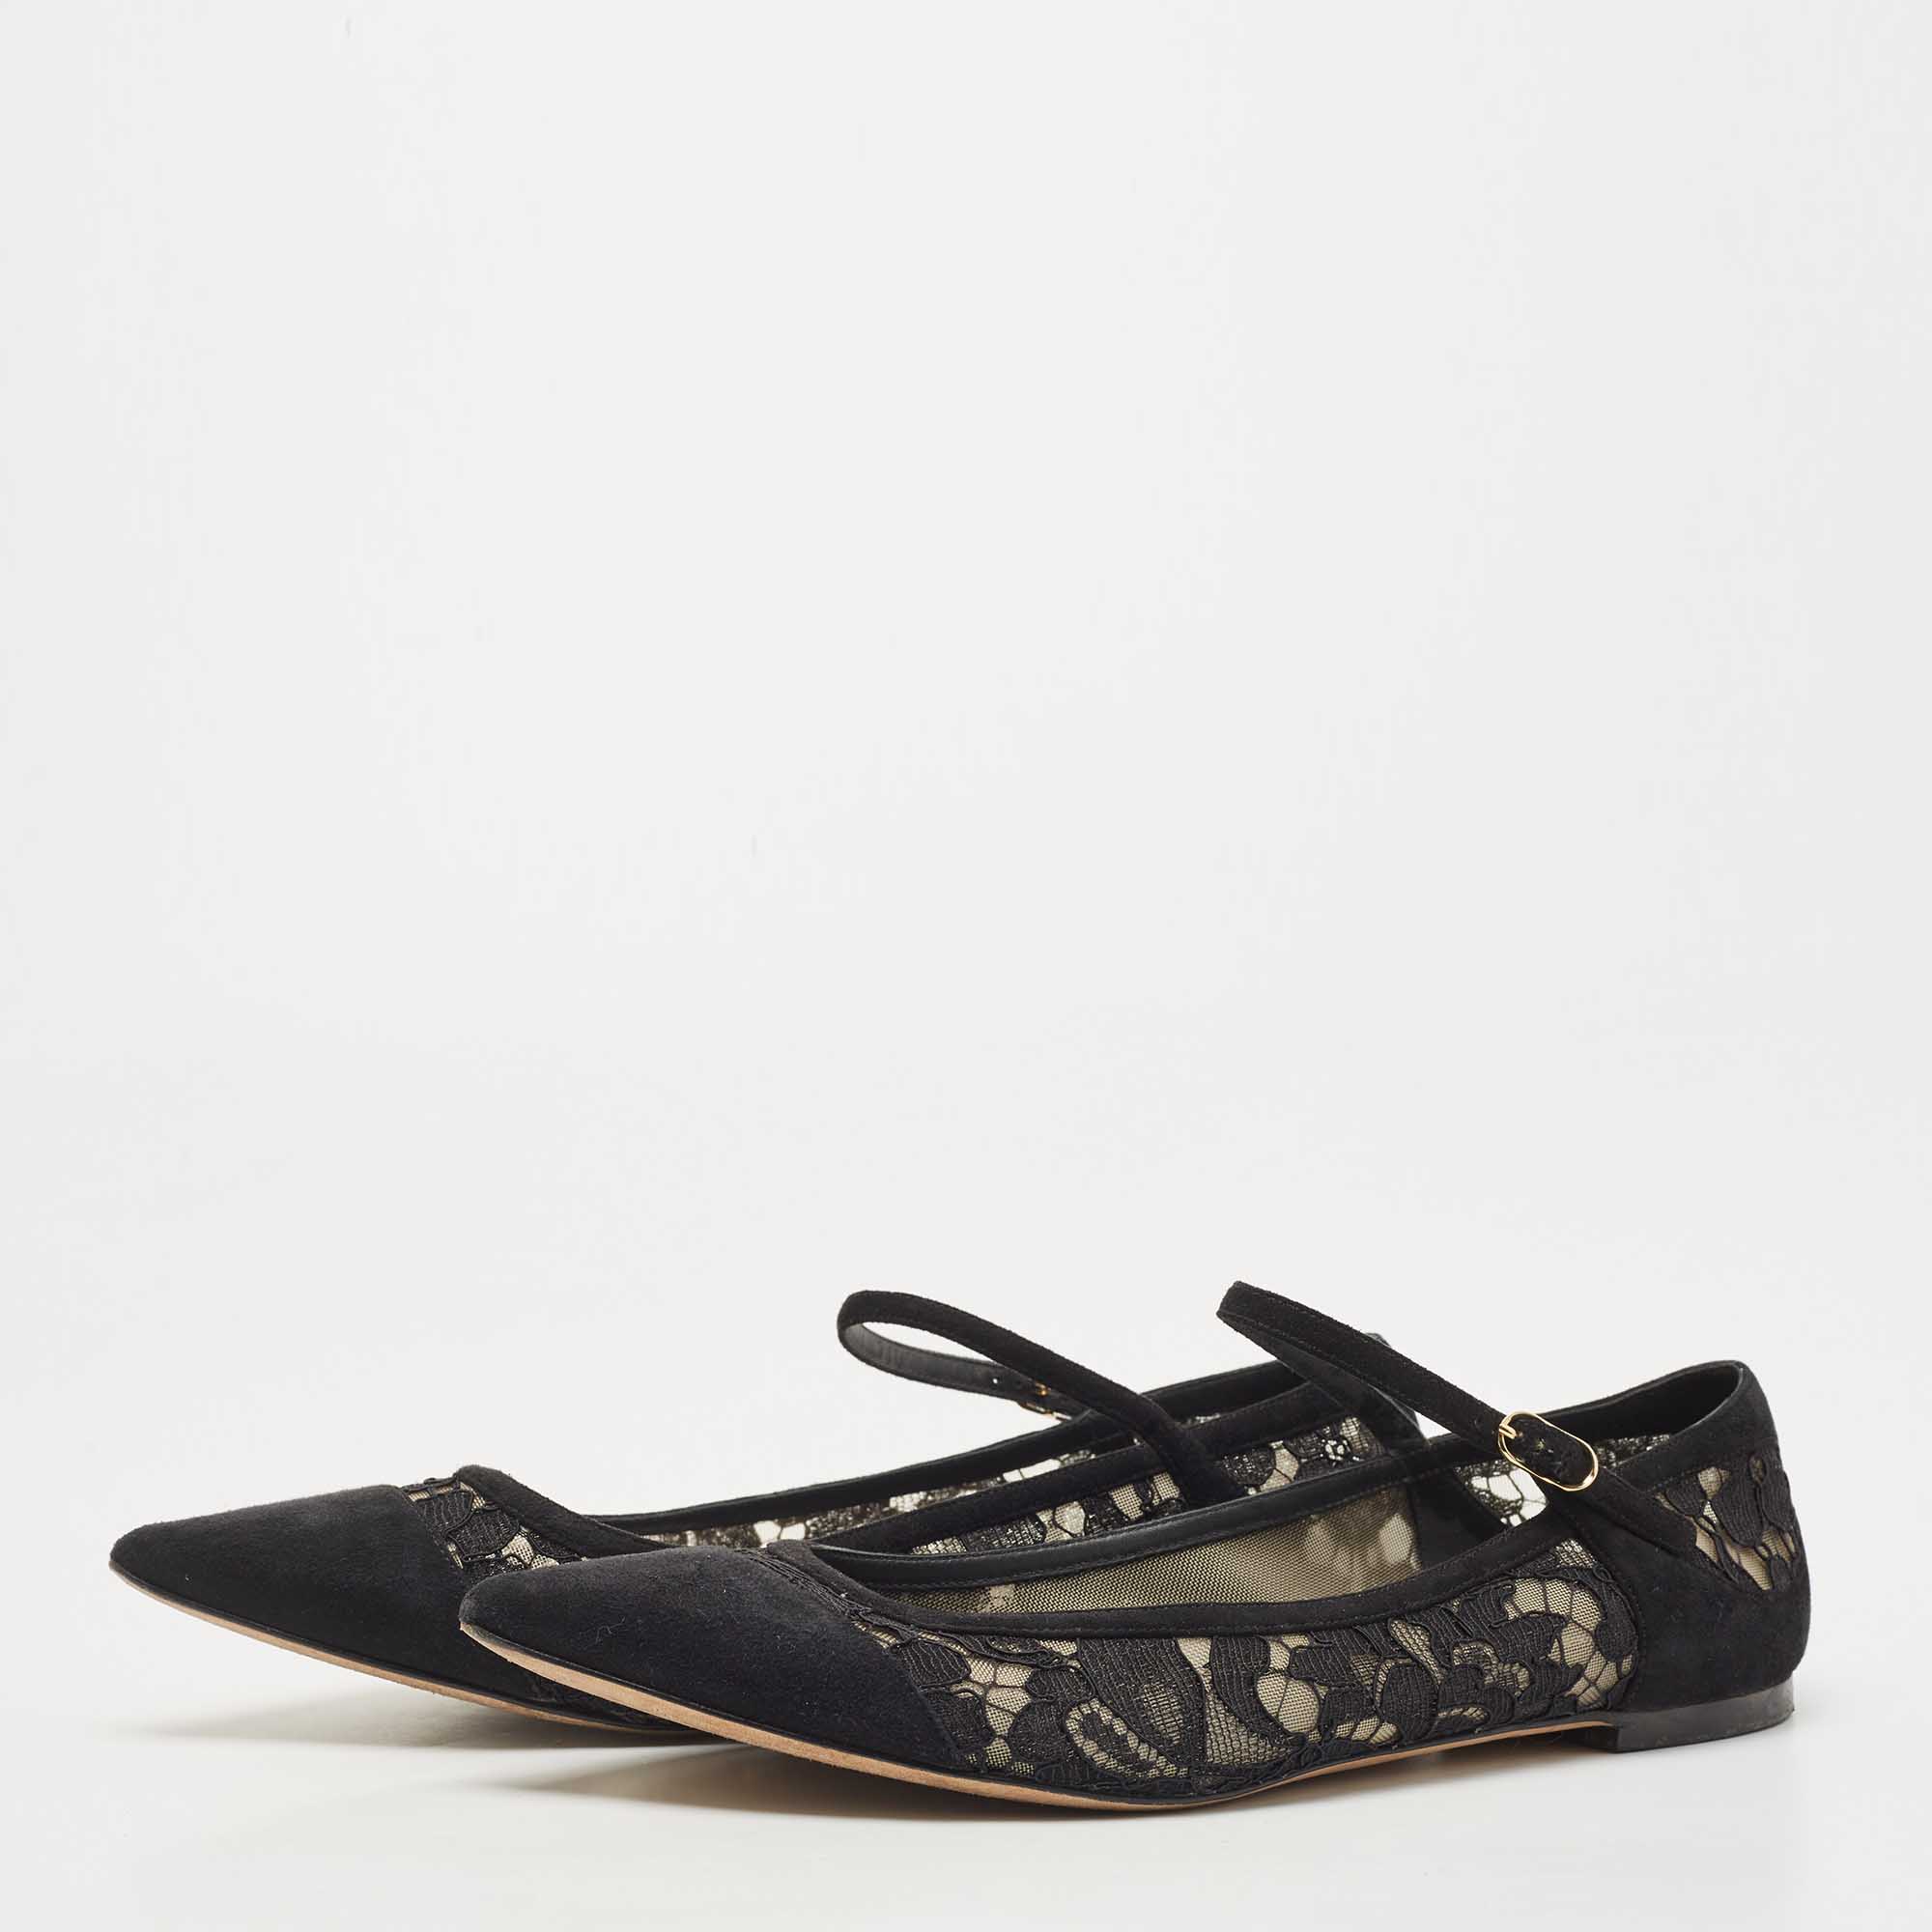 

Dolce & Gabbana Black Suede and Lace Mary Jane Ballet Flats Size